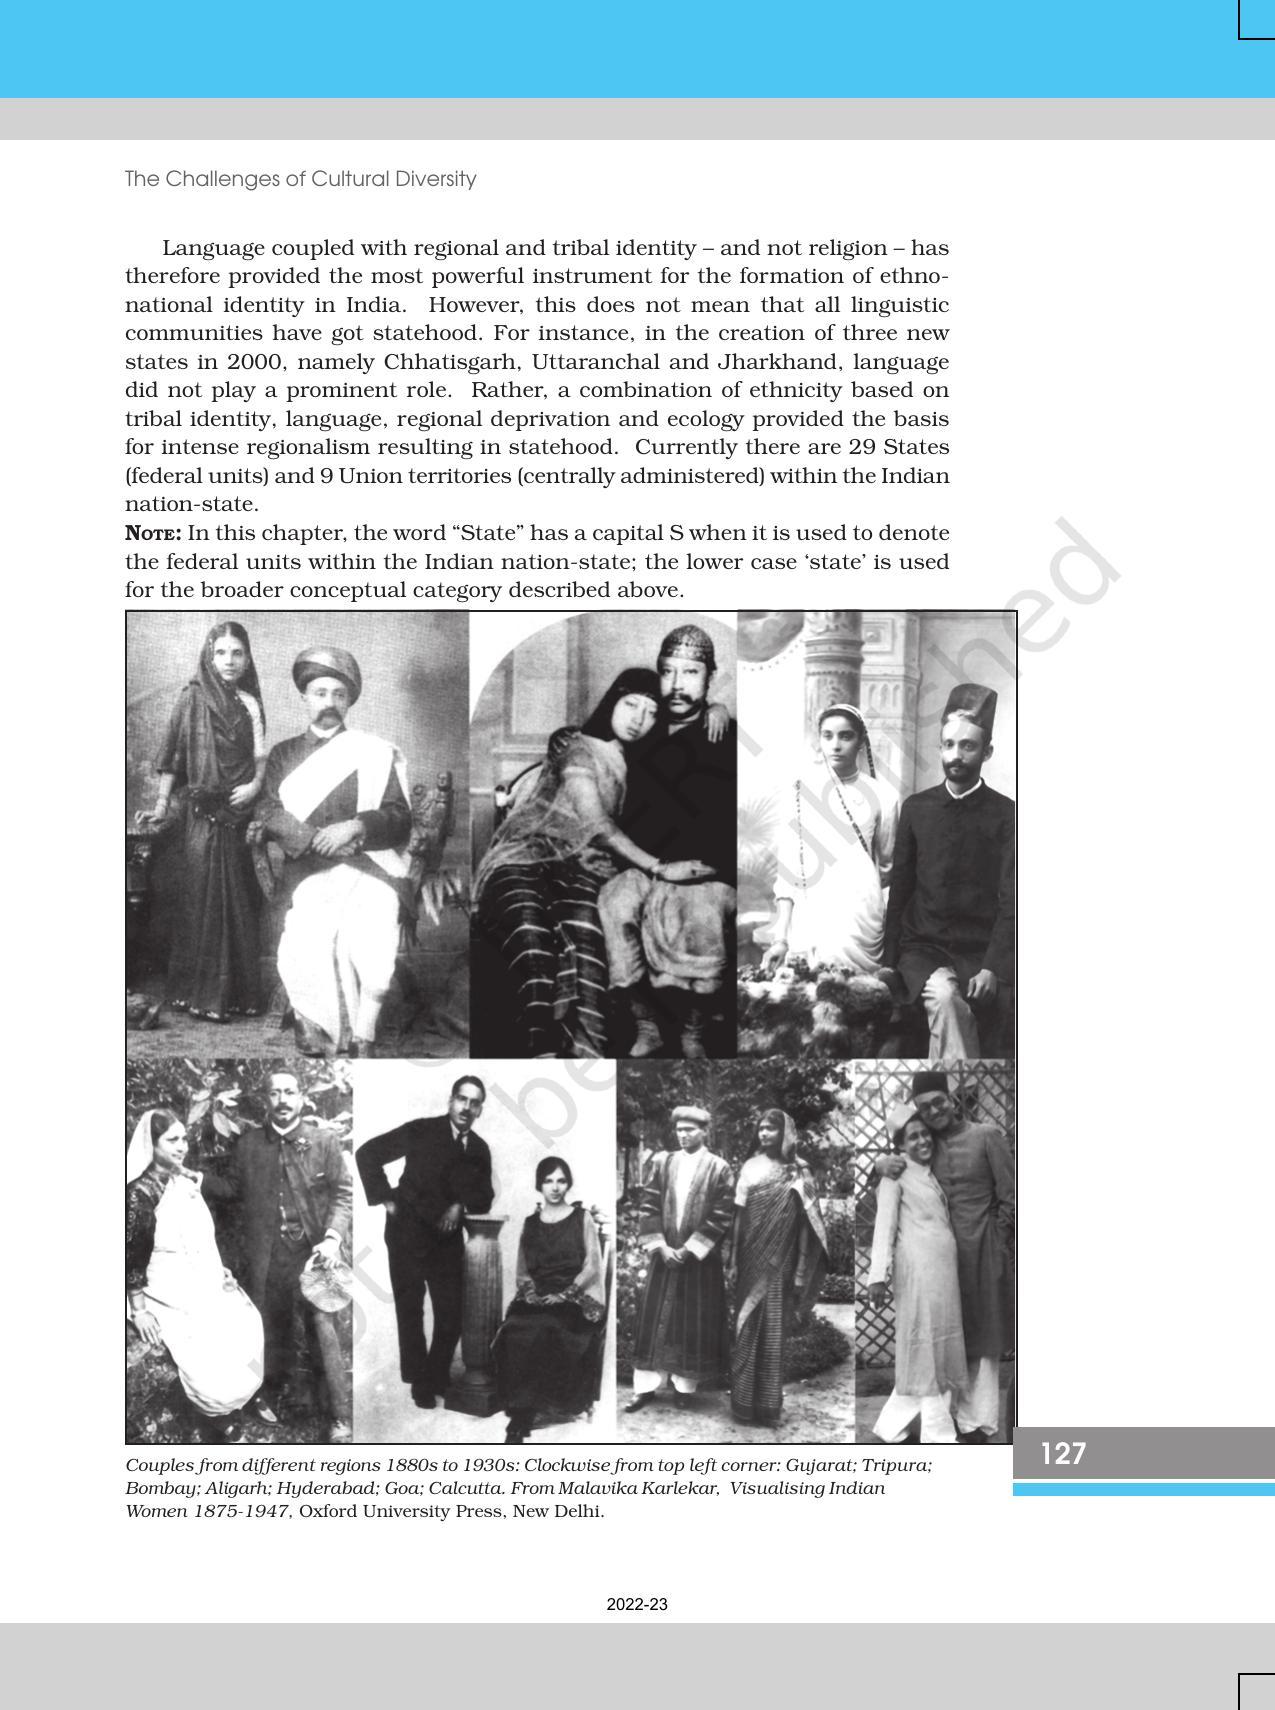 NCERT Book for Class 12 Sociology (Indian Society) Chapter 6 The Challenges of Cultural Diversity - Page 15